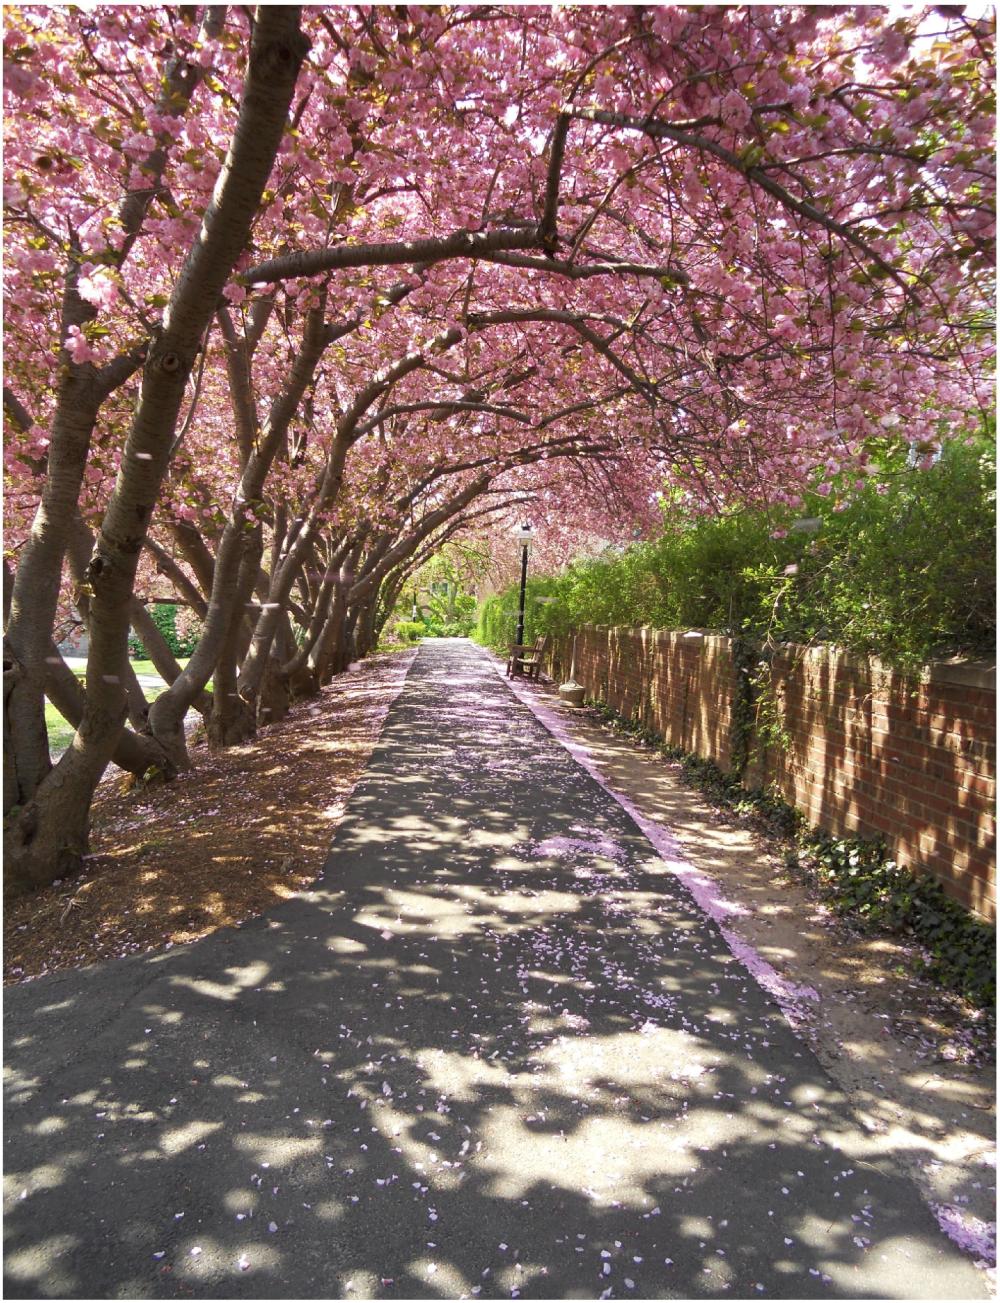 Blooming Magnolia Trees over a walkway in Princeton University